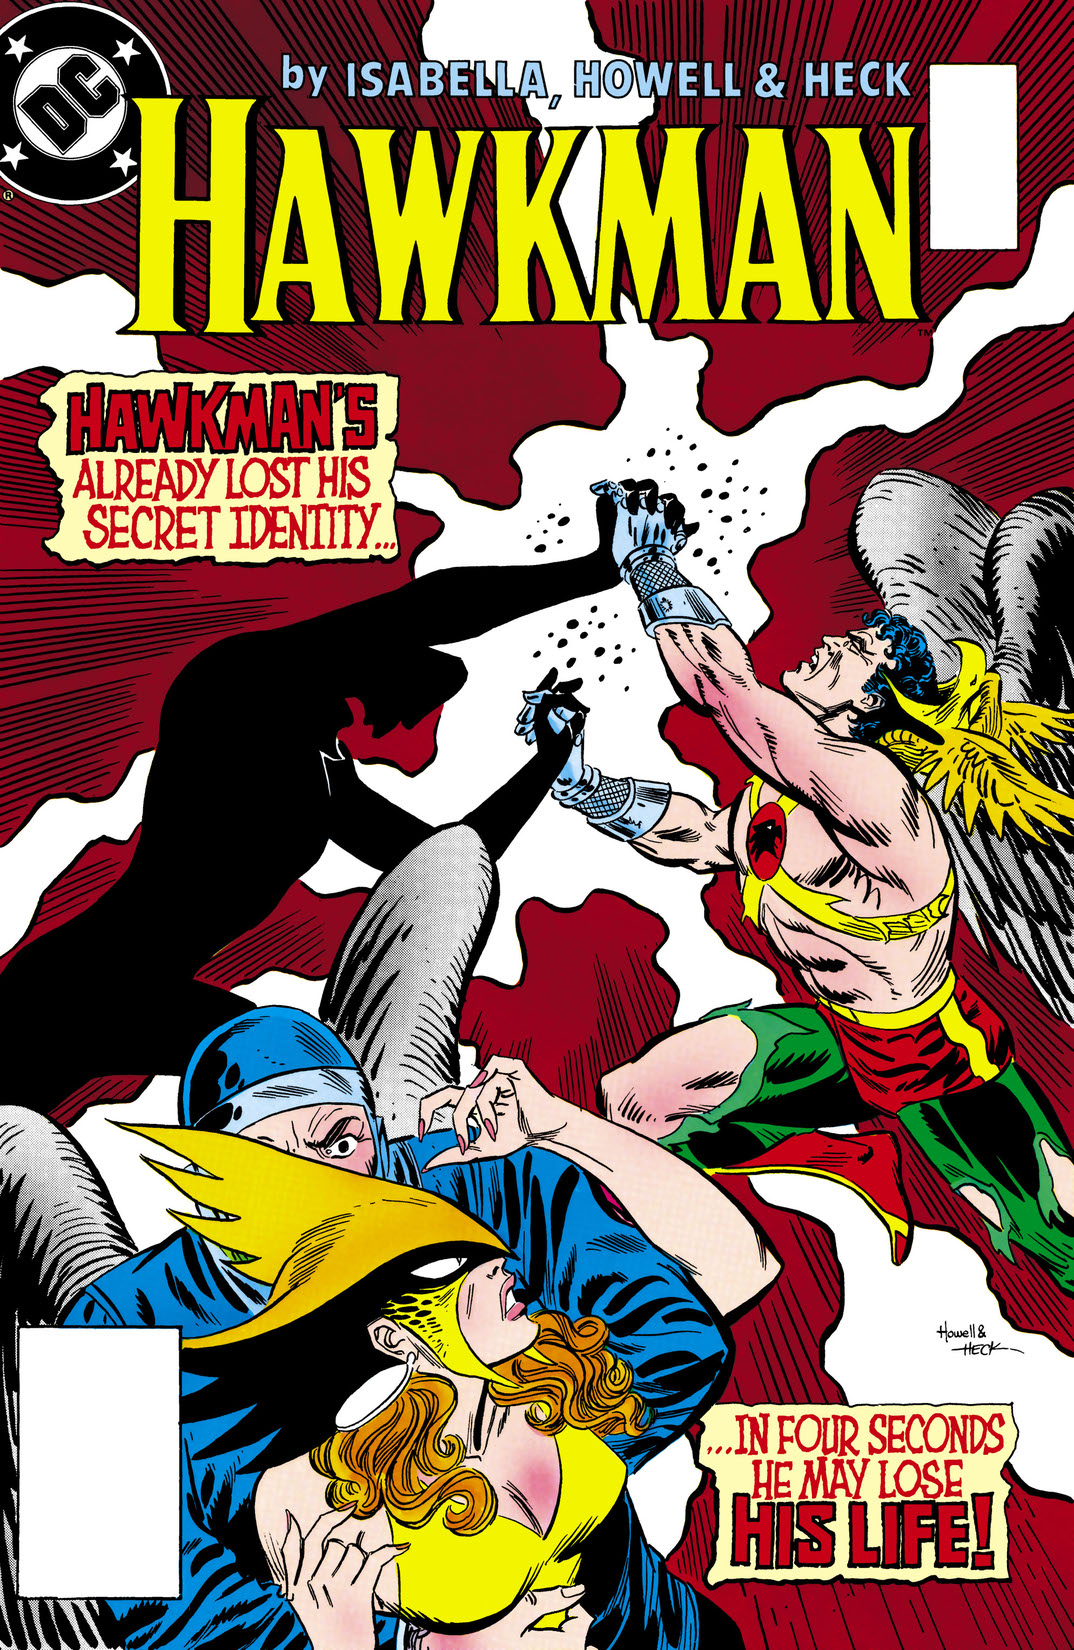 Hawkman (1986-) #3 preview images